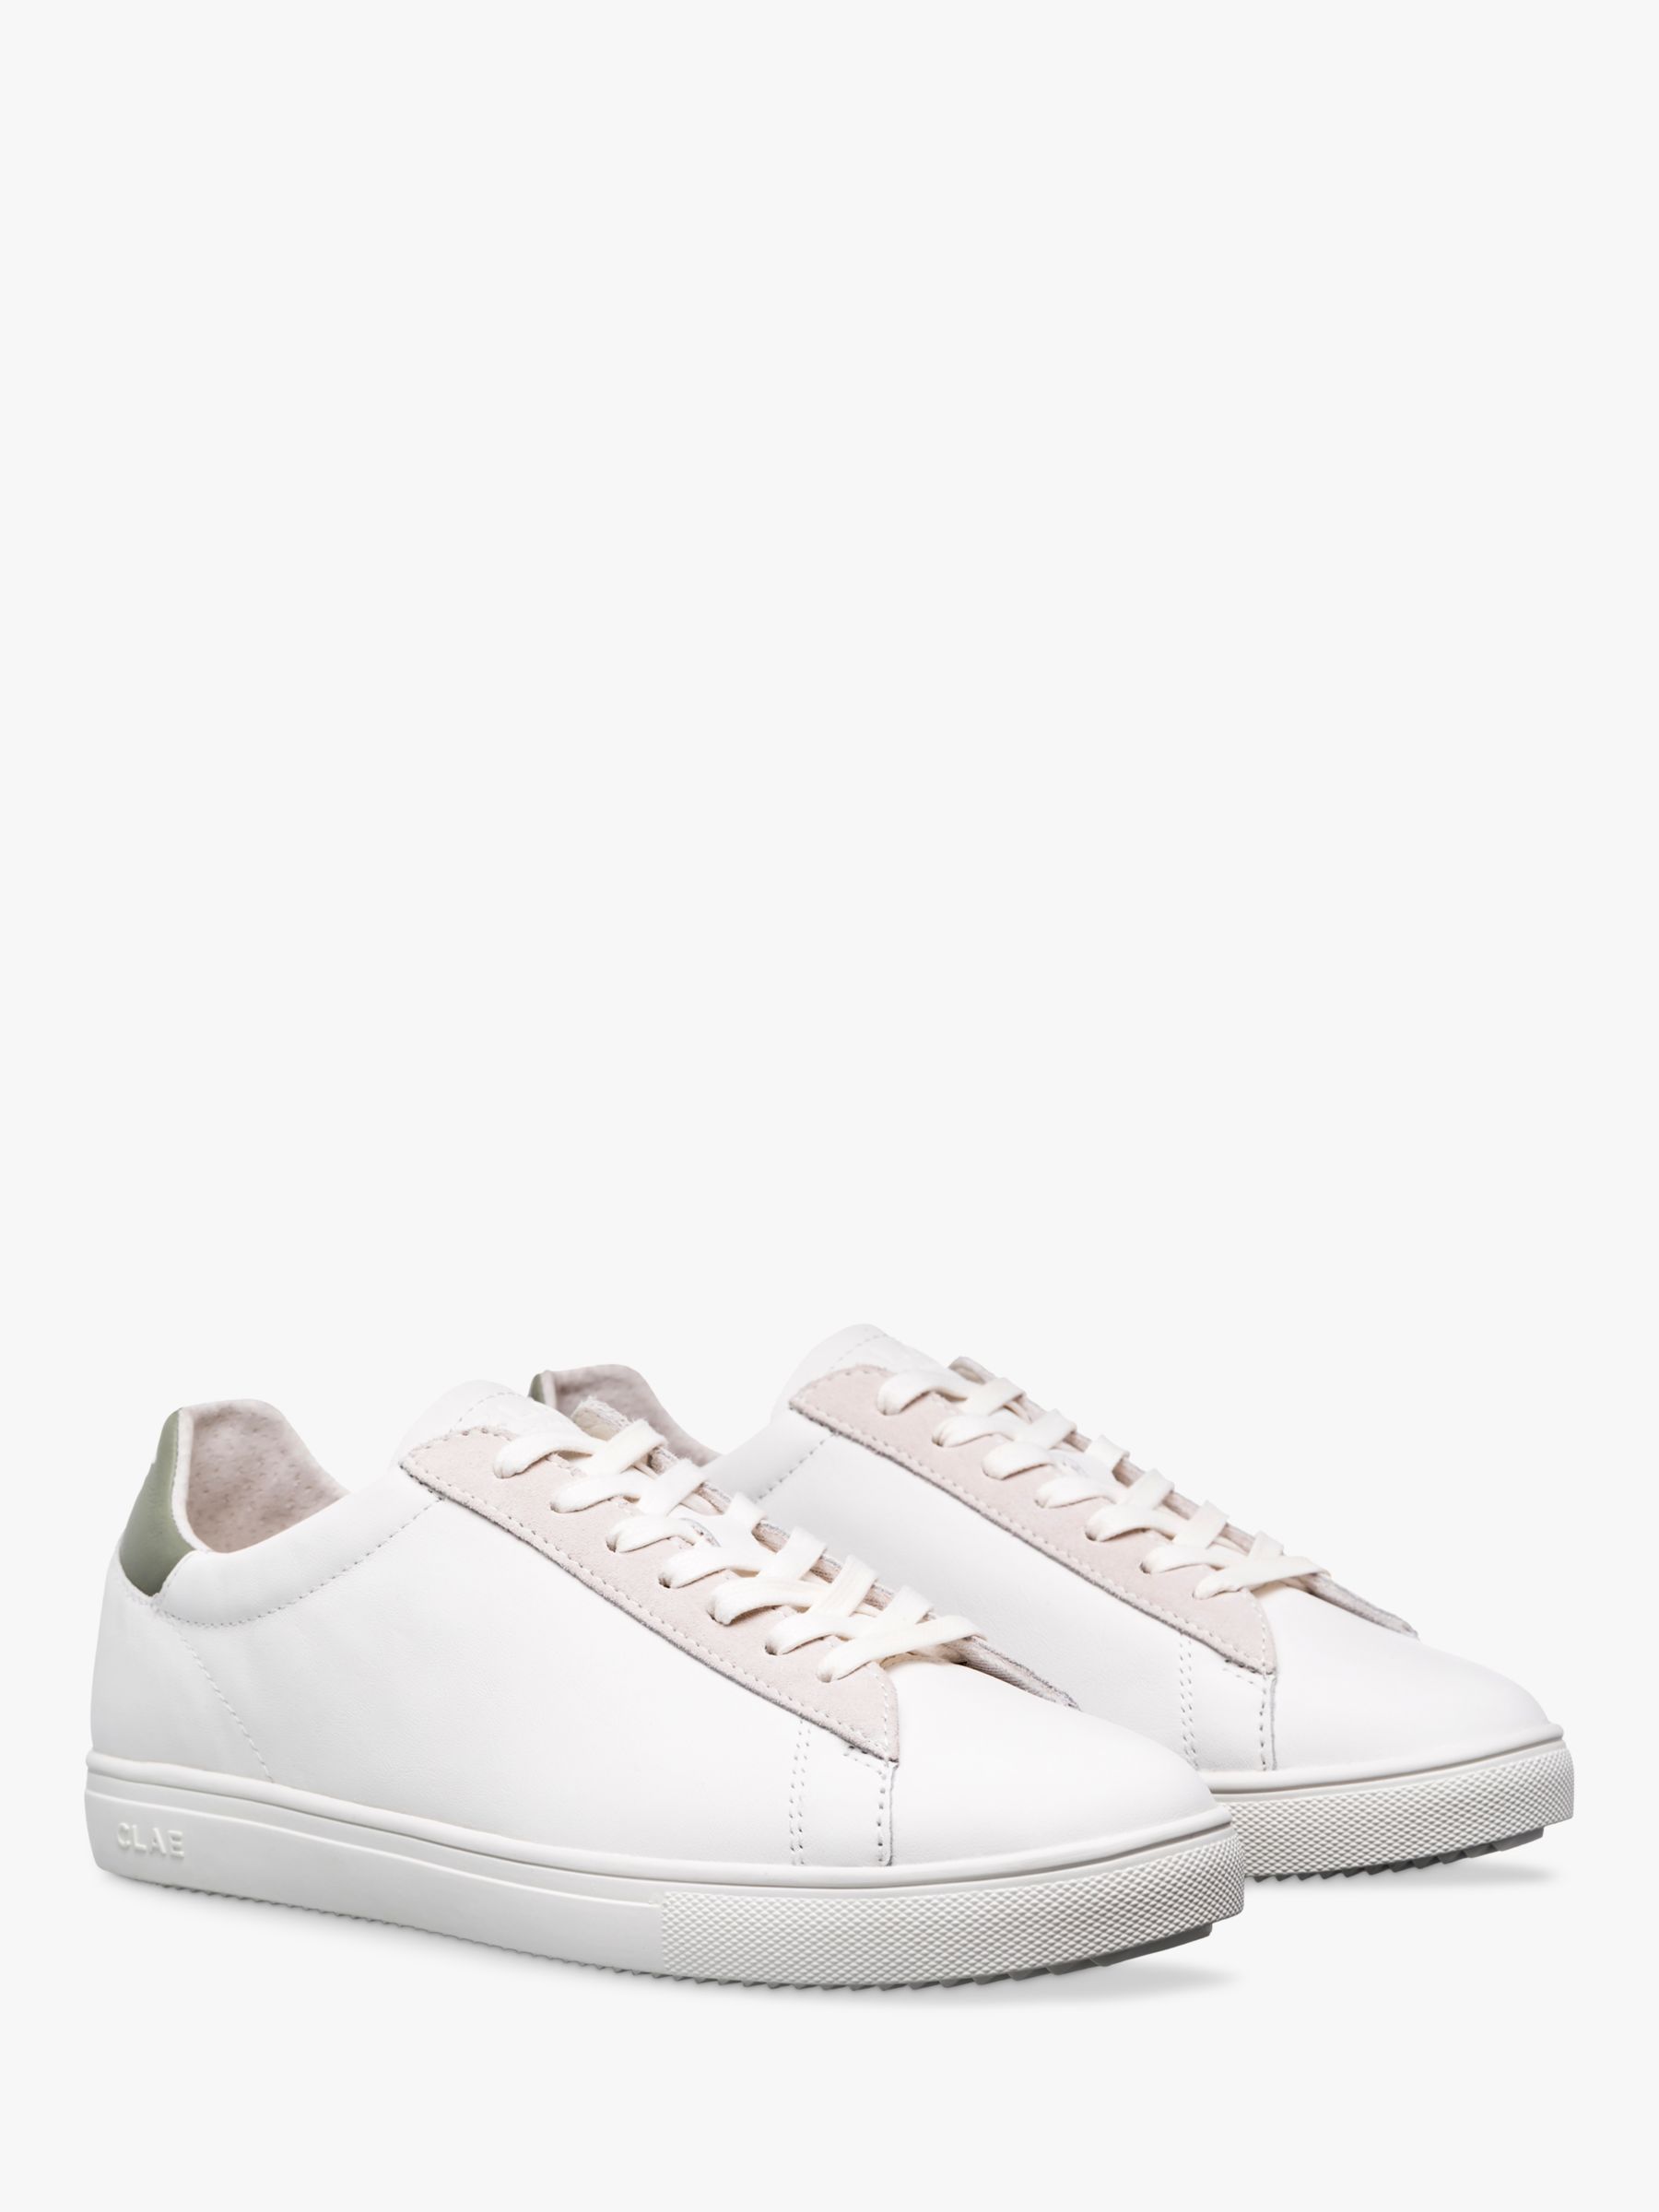 CLAE Bradley Whitel Lace Up Trainers, White, 5